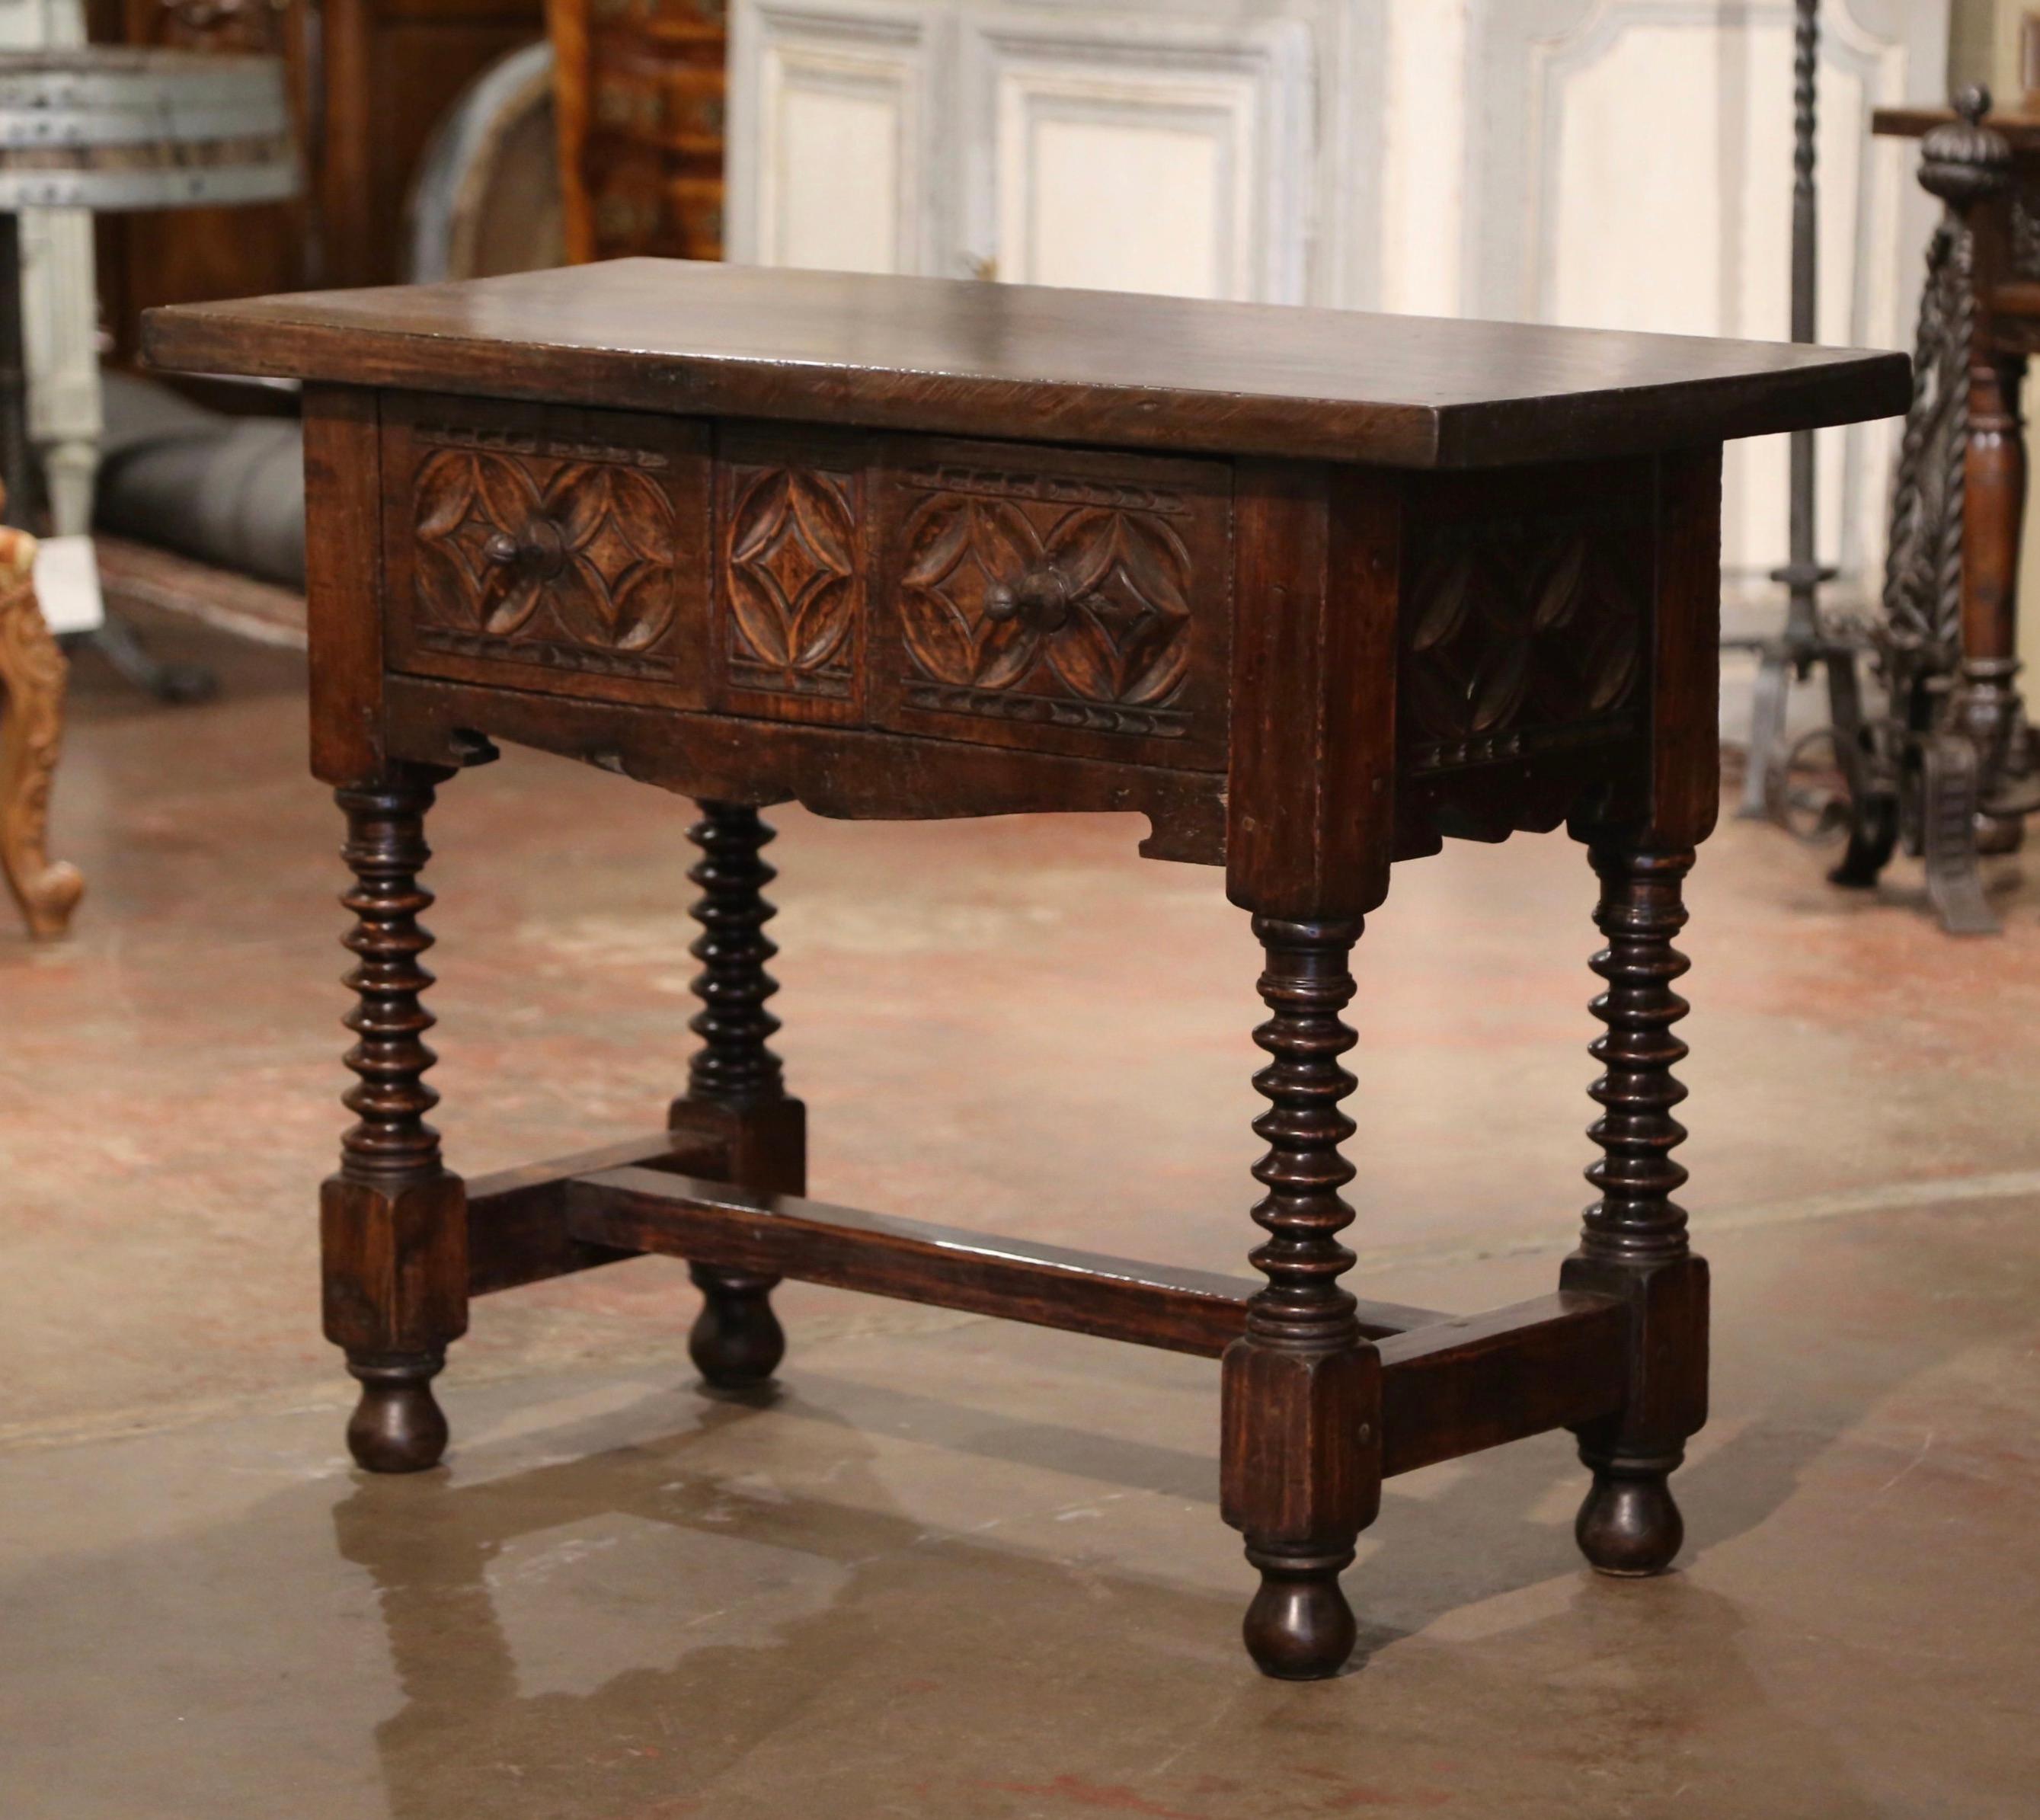 Crafted in Spain circa 1780, the antique console table stands on thick carved spool turned legs ending with bun feet, and embellished with a bottom stretcher. The tall table with scalloped apron, features two hand carved drawers across the front